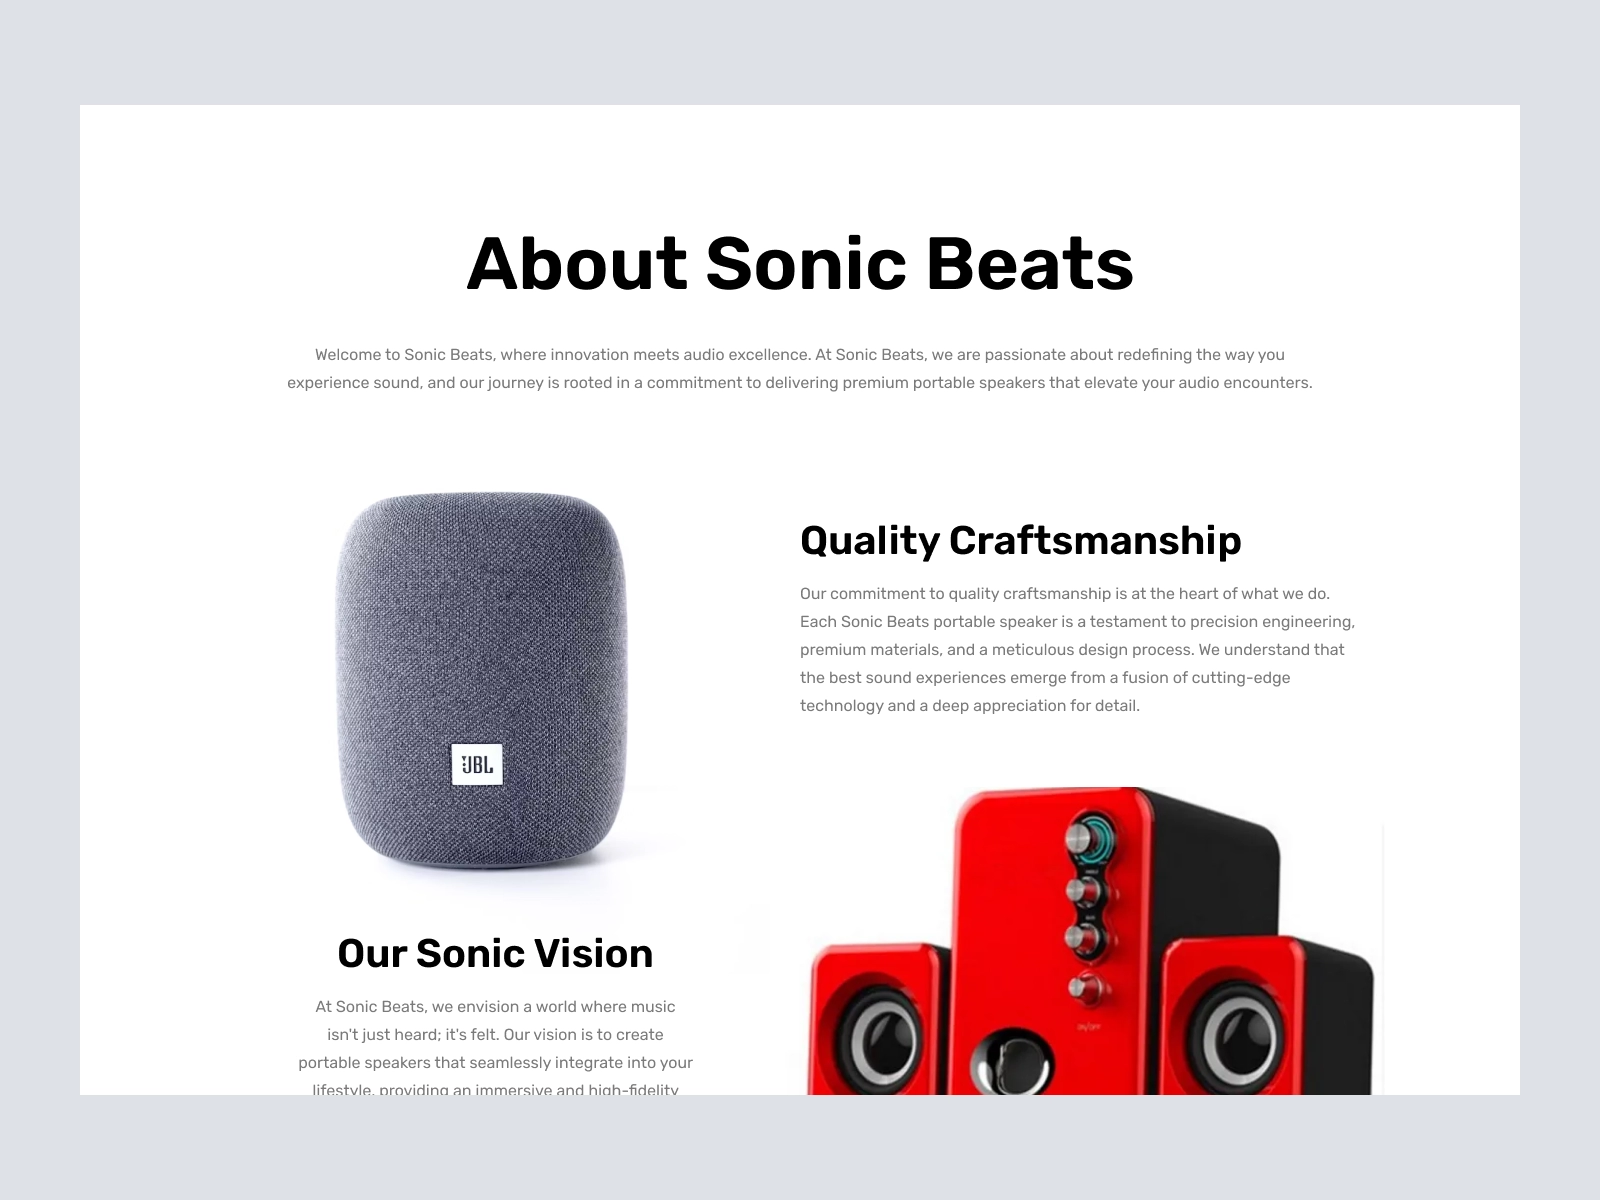 SonicBeats - Bluetooth Speakers and Radio Shopify Store for Adobe XD - screen 3